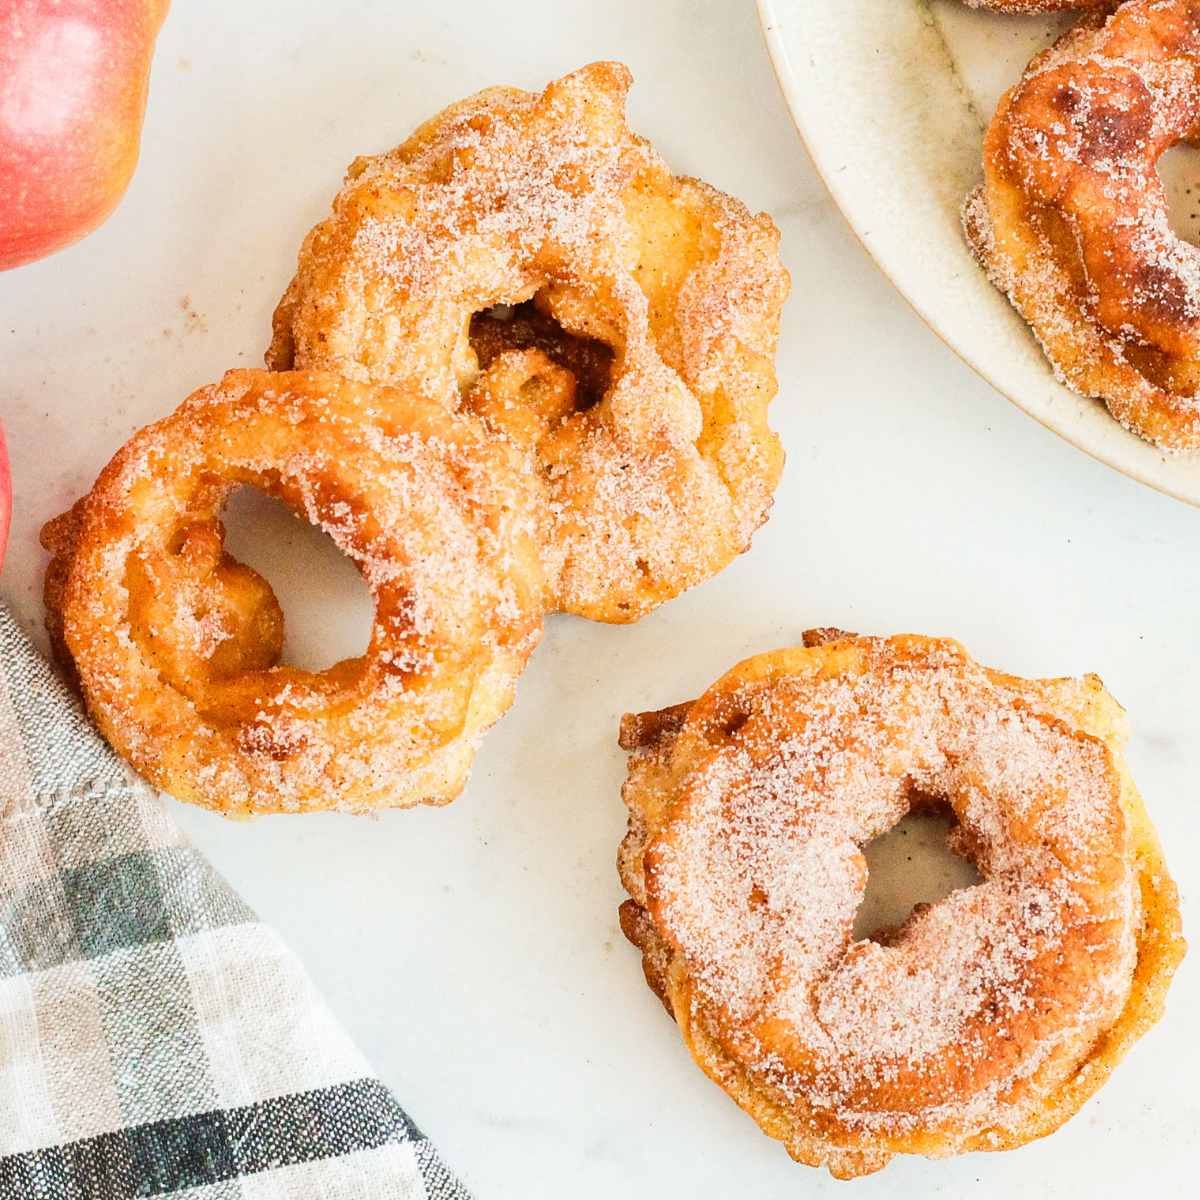 3 apple fritter rings on a white marble countertop next to a plate full of more apple rings. A plaid tea towel and fresh, red apples are next to them.